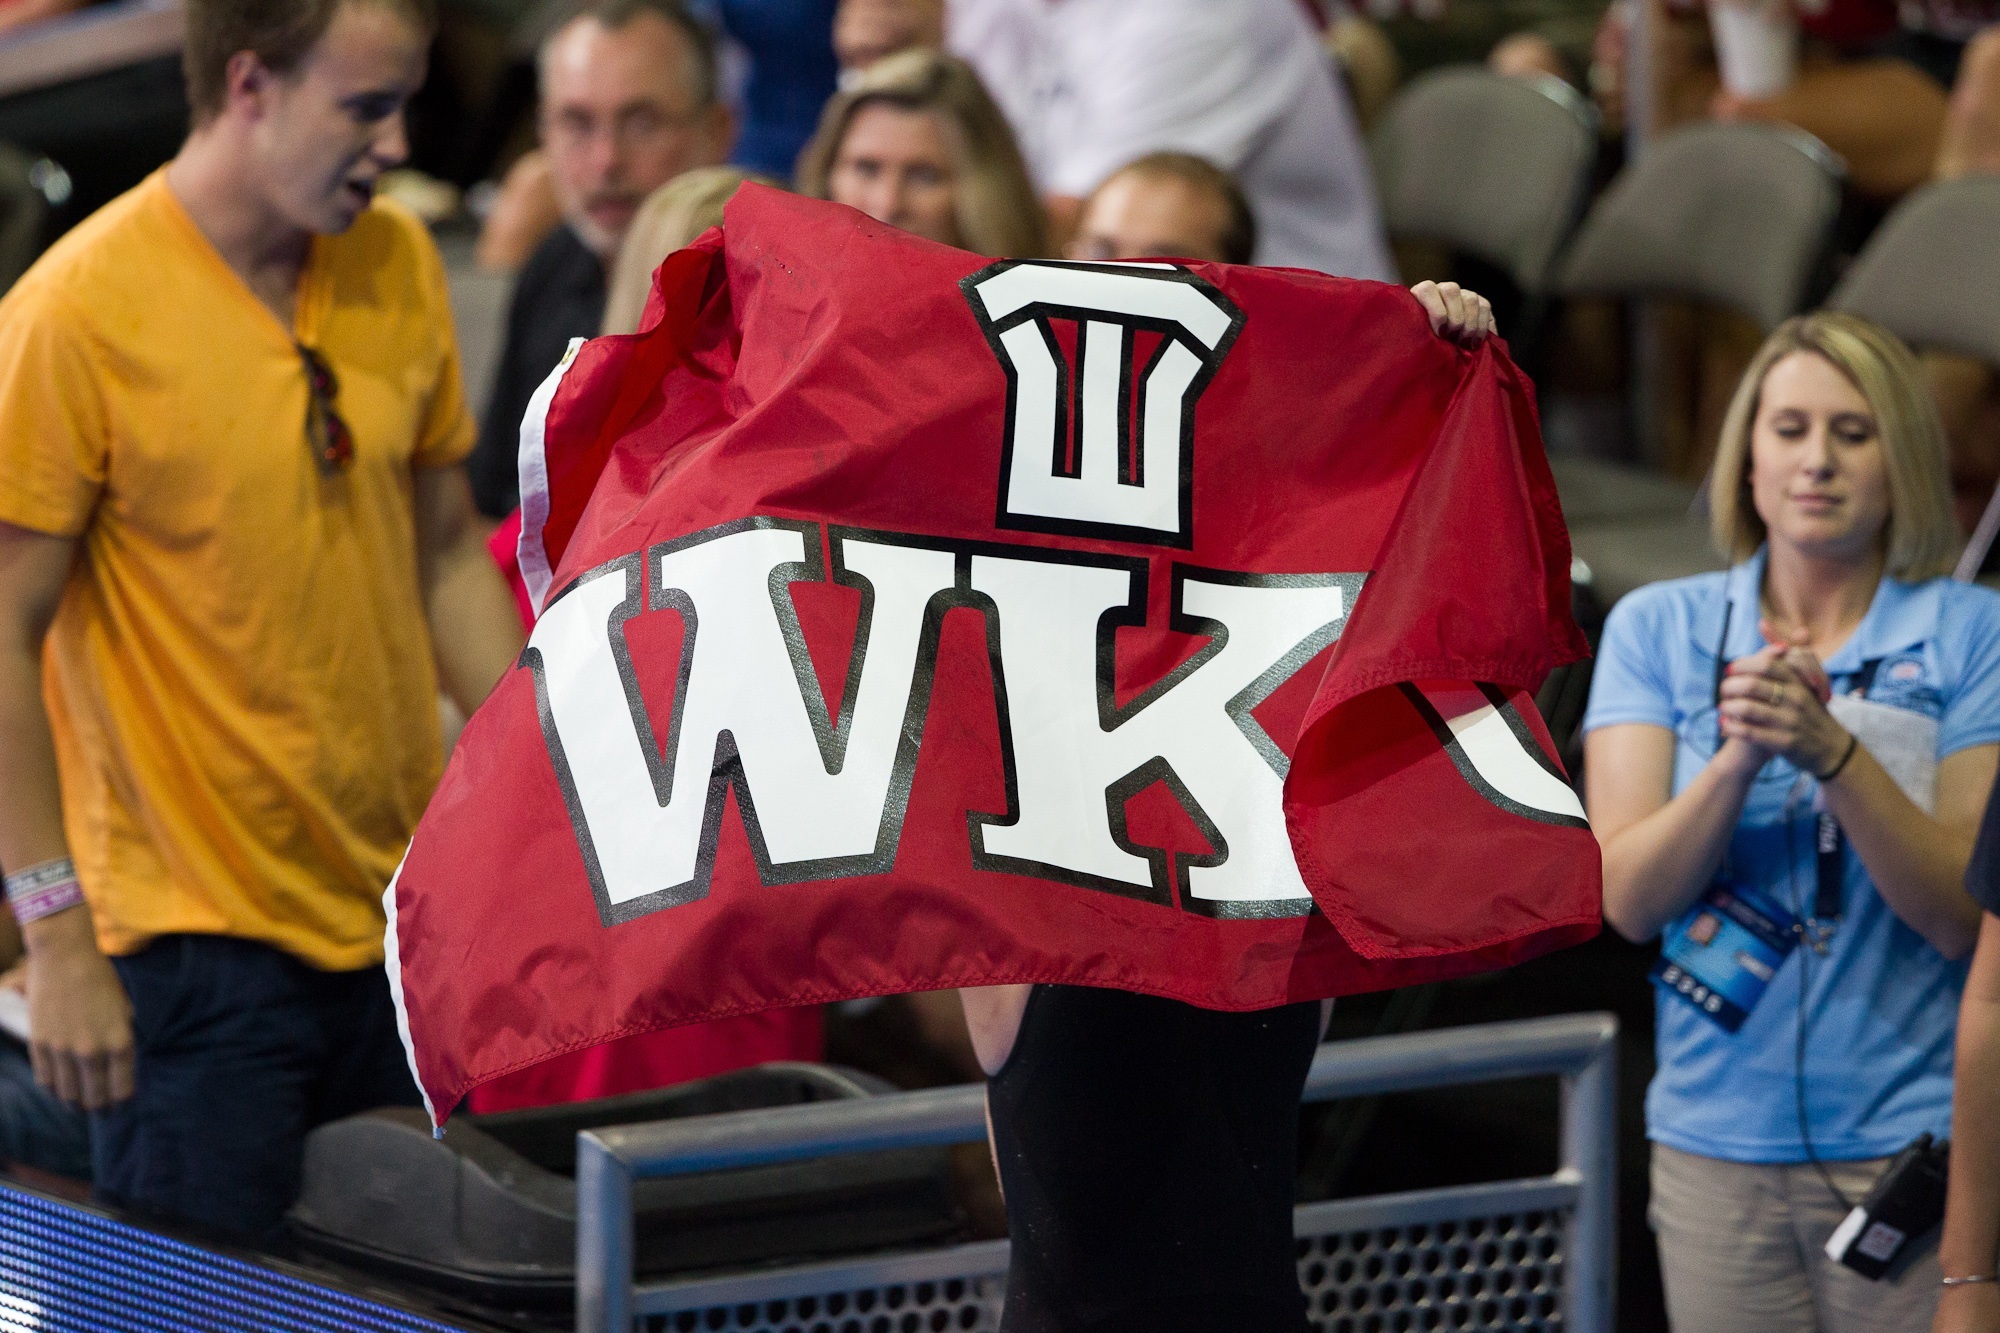 Western Kentucky University Suspends Swimming and Diving Program For 5 Years In Light of Hazing Allegations